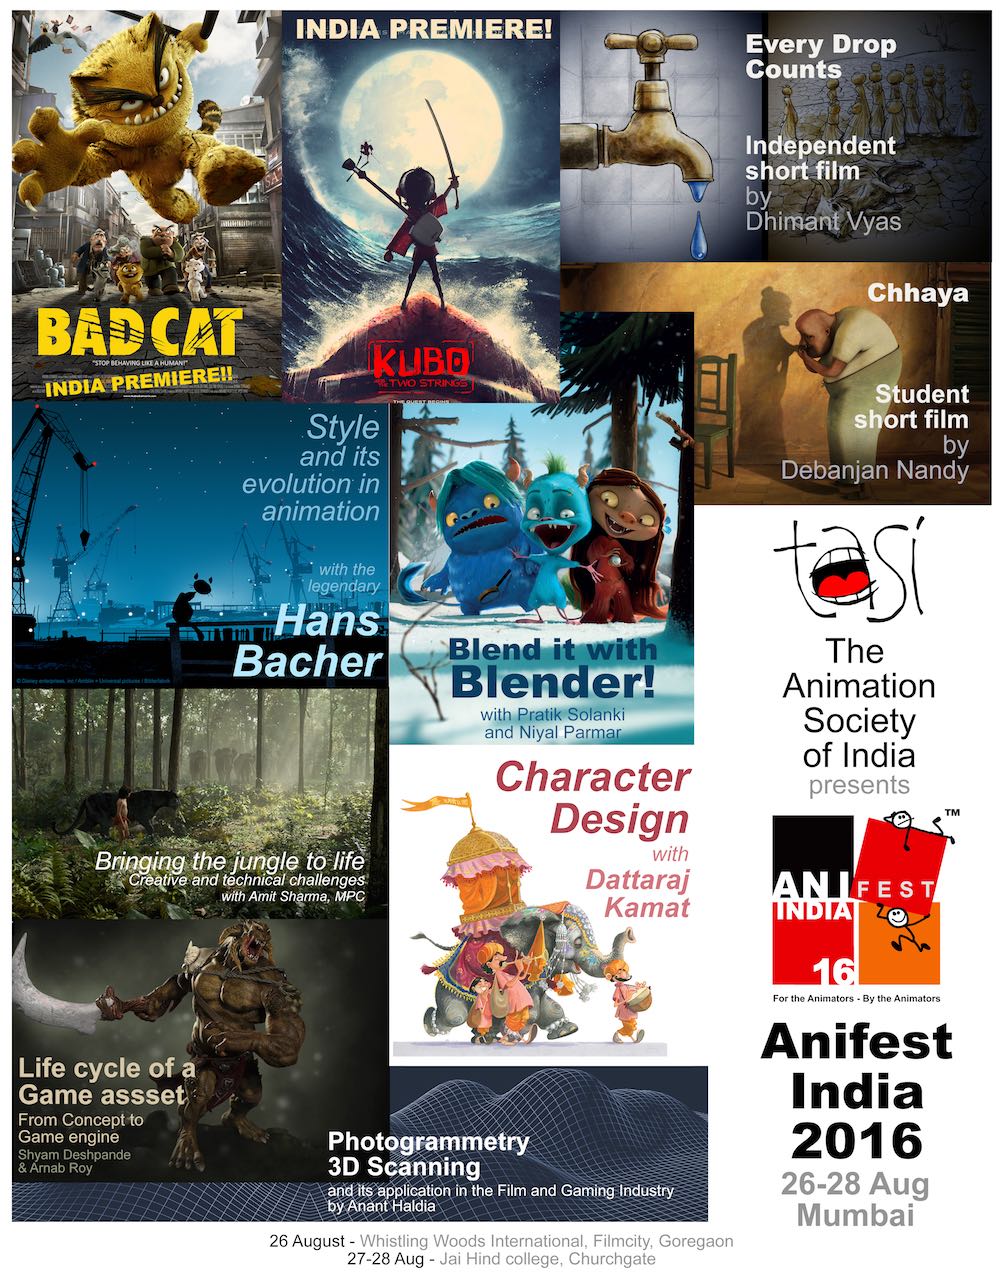 Anifest India 2016 - All Sessions